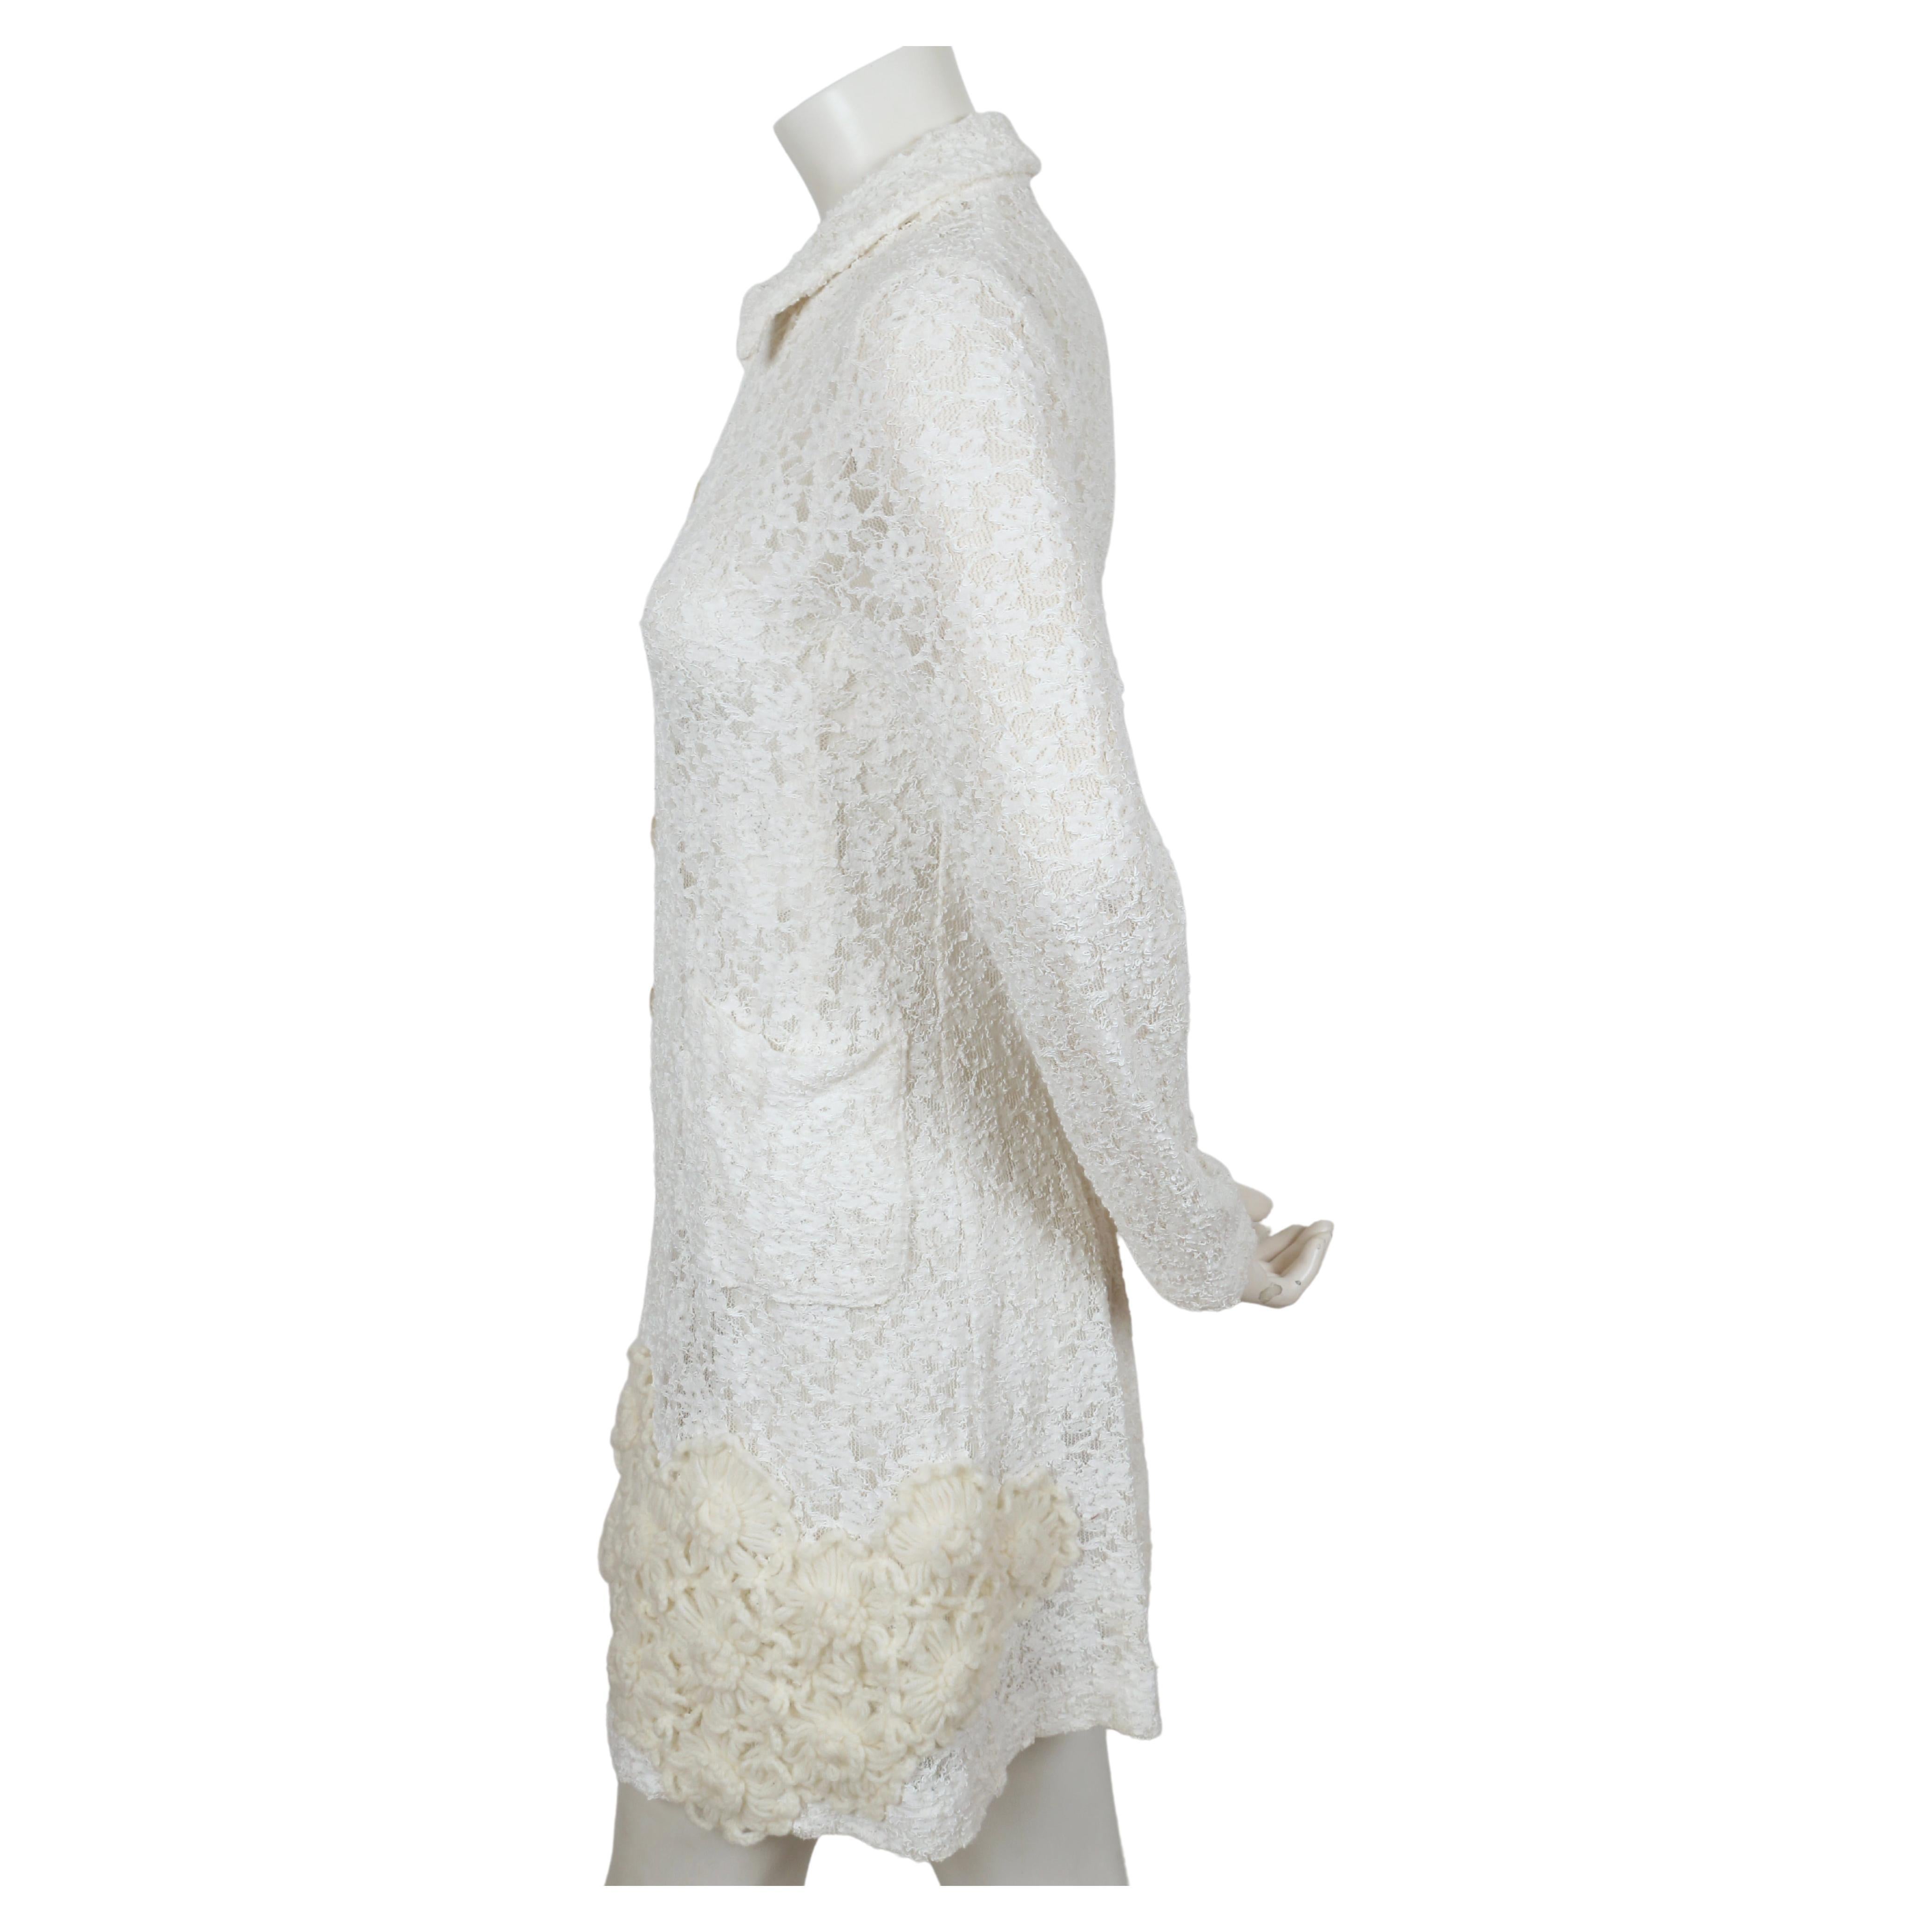 Off-white long lace jacket with cream knit flower detail designed by Rei Kawakubo for Comme Des Garcons dating to spring of 2012. Size 'S'. Best fits a size XS. Approximate measurements (unstretched): shoulder 14